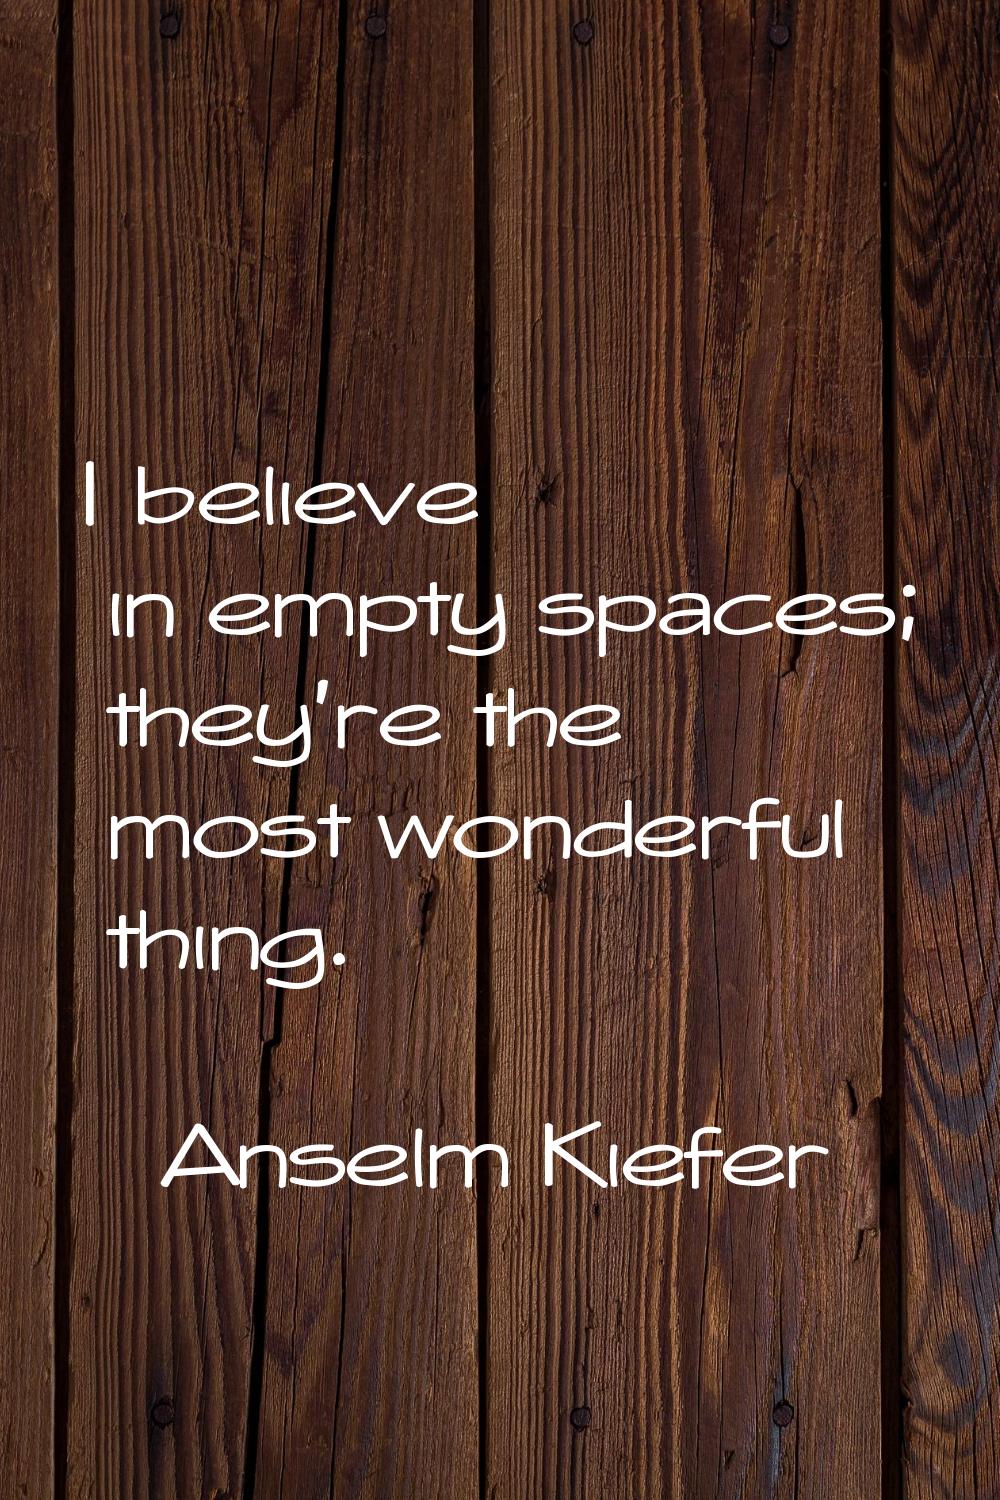 I believe in empty spaces; they're the most wonderful thing.